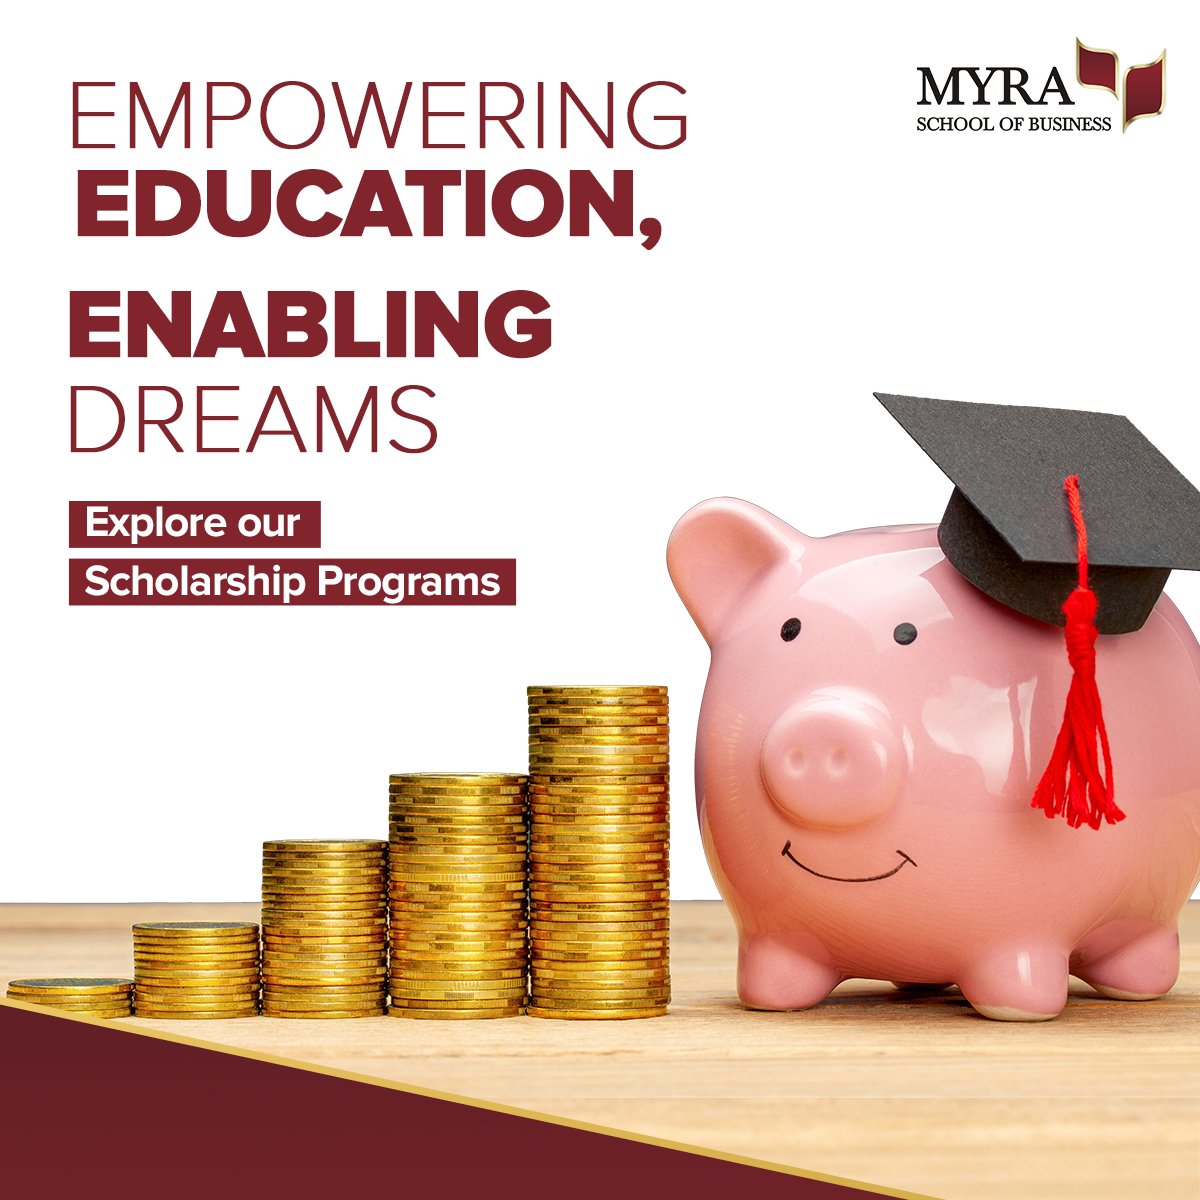 Our scholarship program empowers you to pursue your dreams. 
Get in touch with us to know more.

#businessschool #mba #business #bschool #management #studyabroad #college #entrepreneur #marketing #leadership #finance #mbalife #entrepreneurship #university #mbastudent